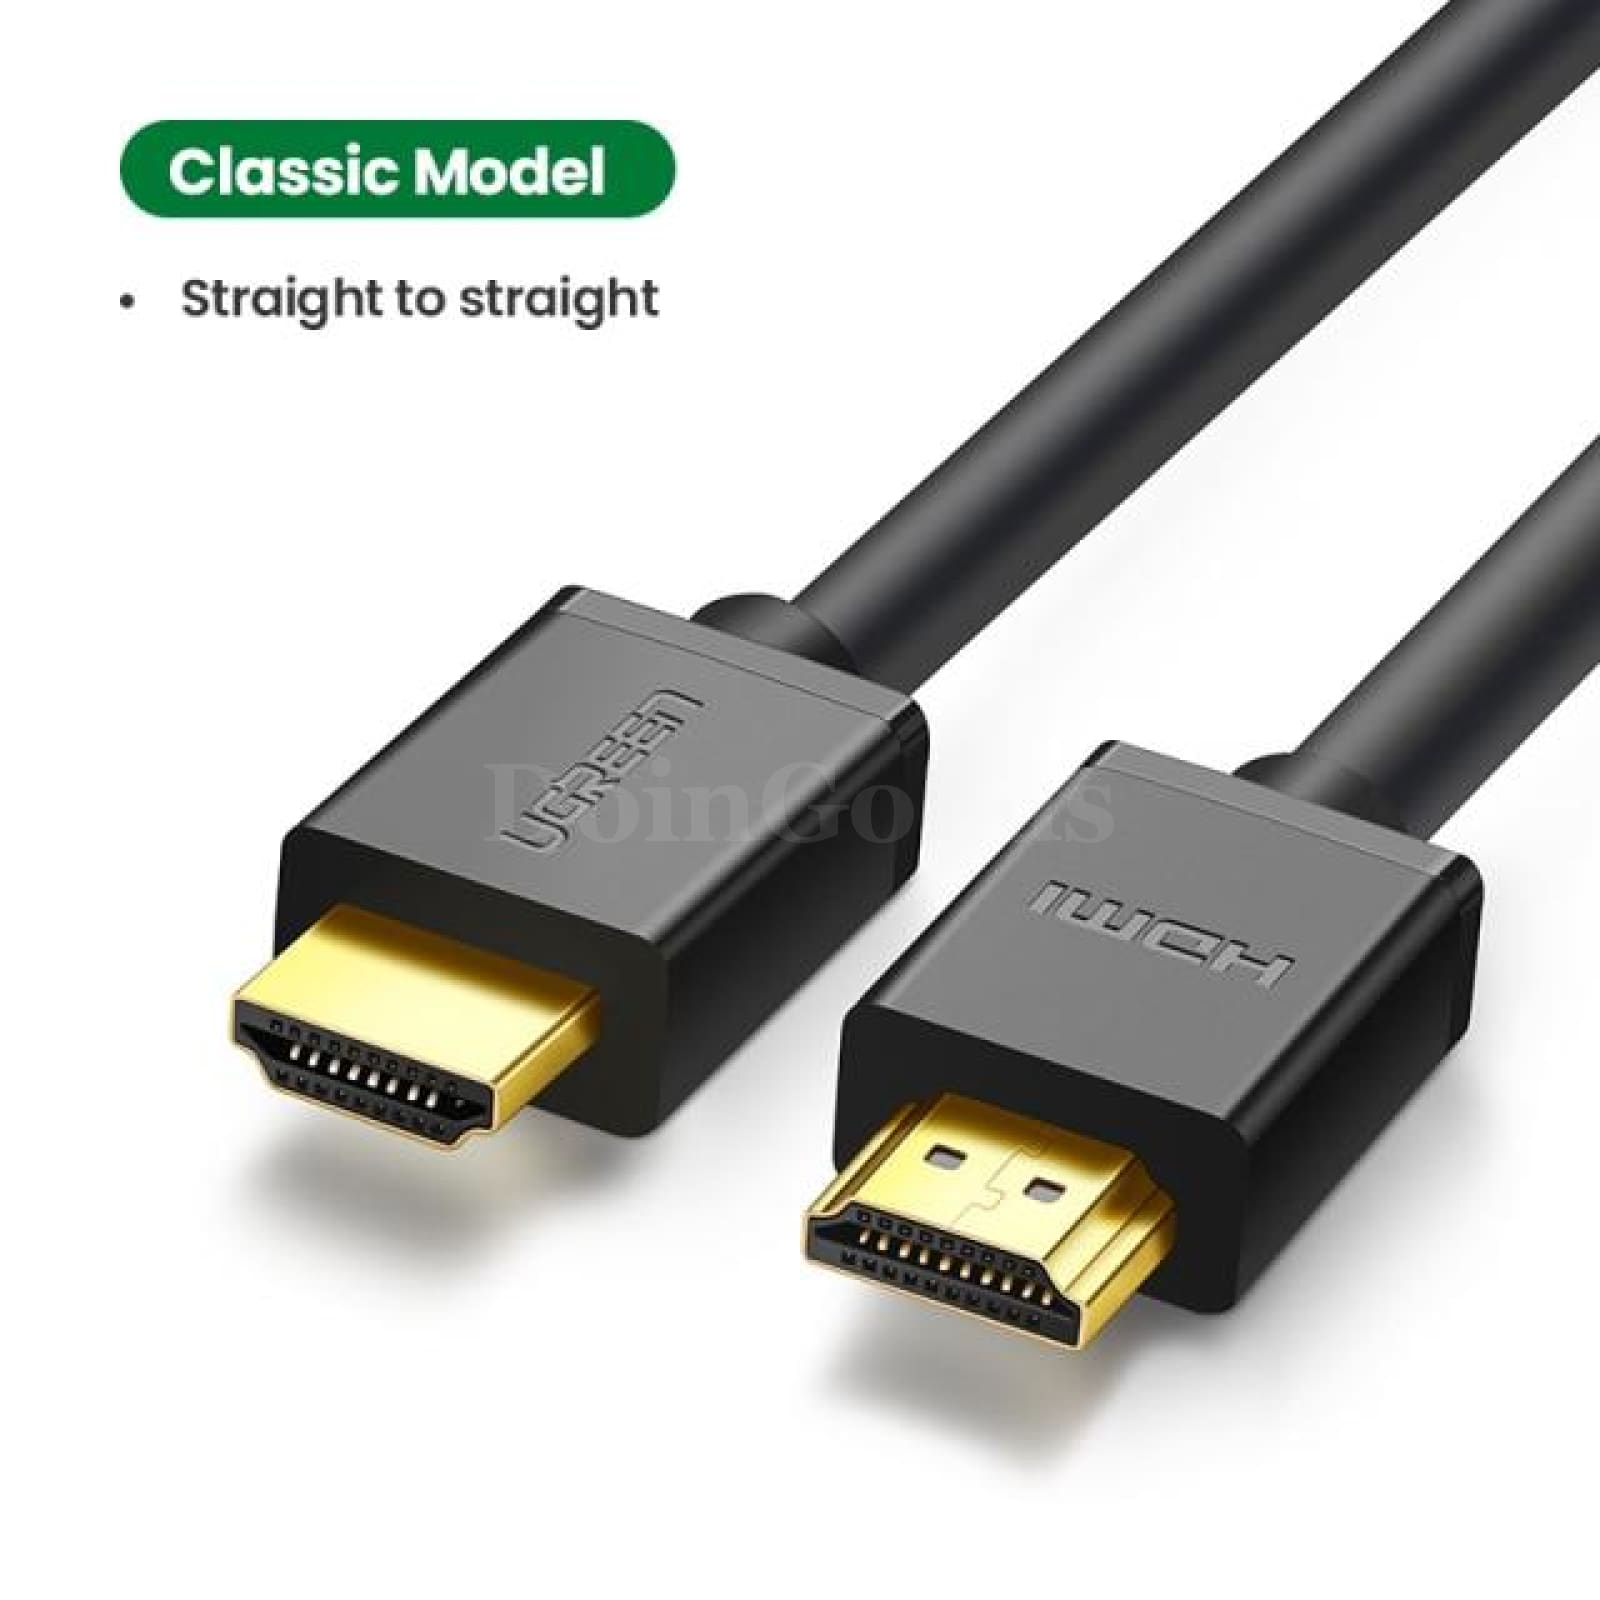 Ugreen High Quality Hdmi Cable Angle 90 Degree 8Ft 4K Speed Gold Plated 3Ft Classic Model / 5M